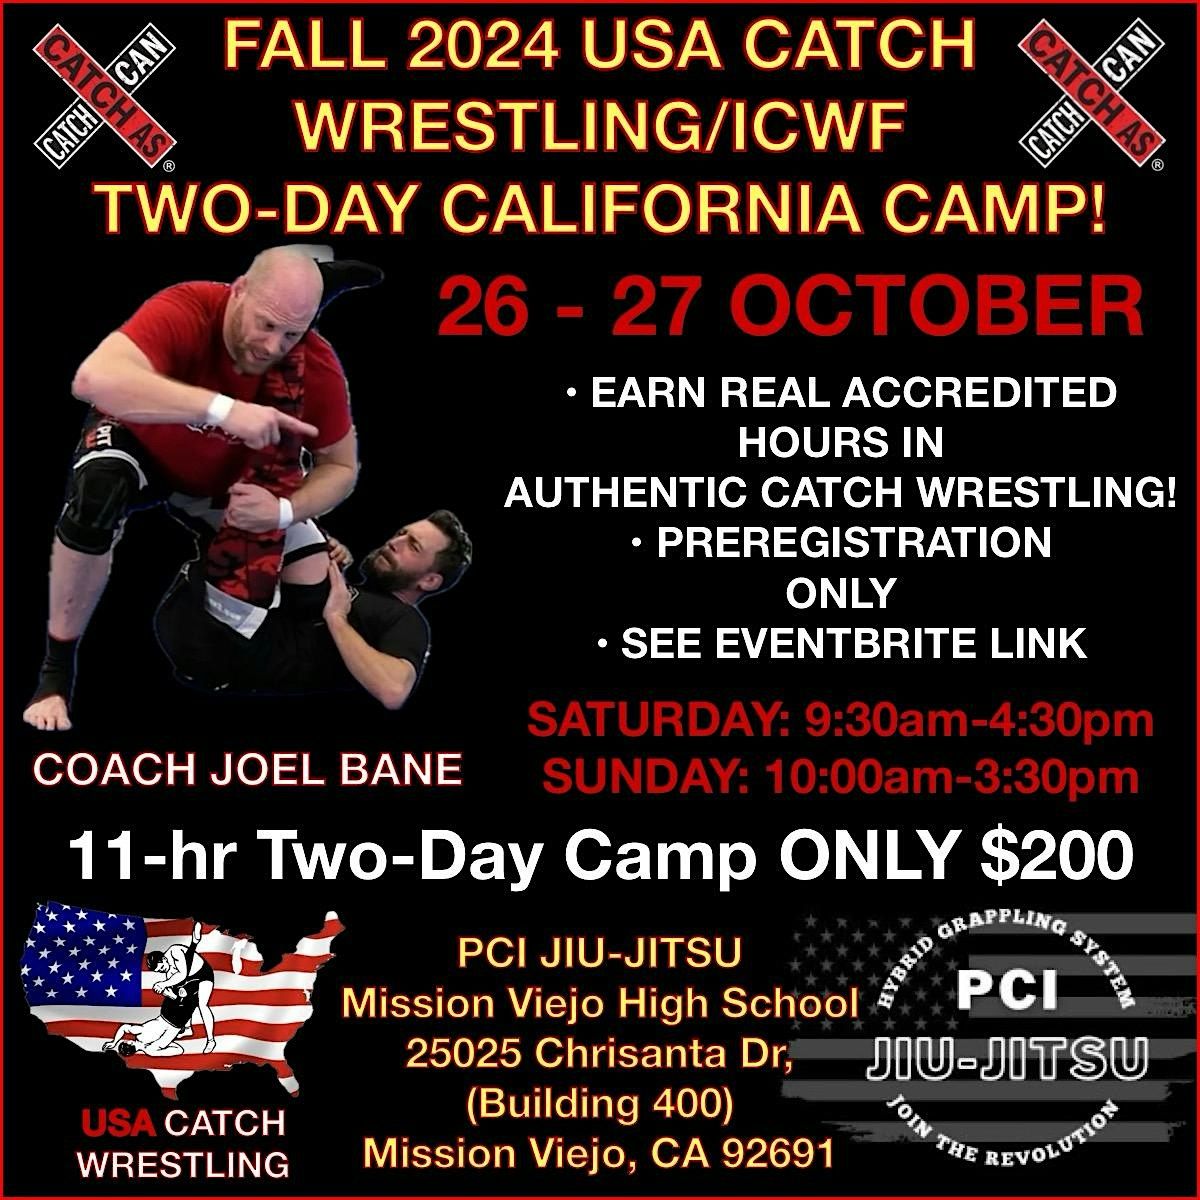 THE FALL 2024 USA CATCH WRESTLING\/ICWF TWO-DAY CALIFORNIA CAMP!